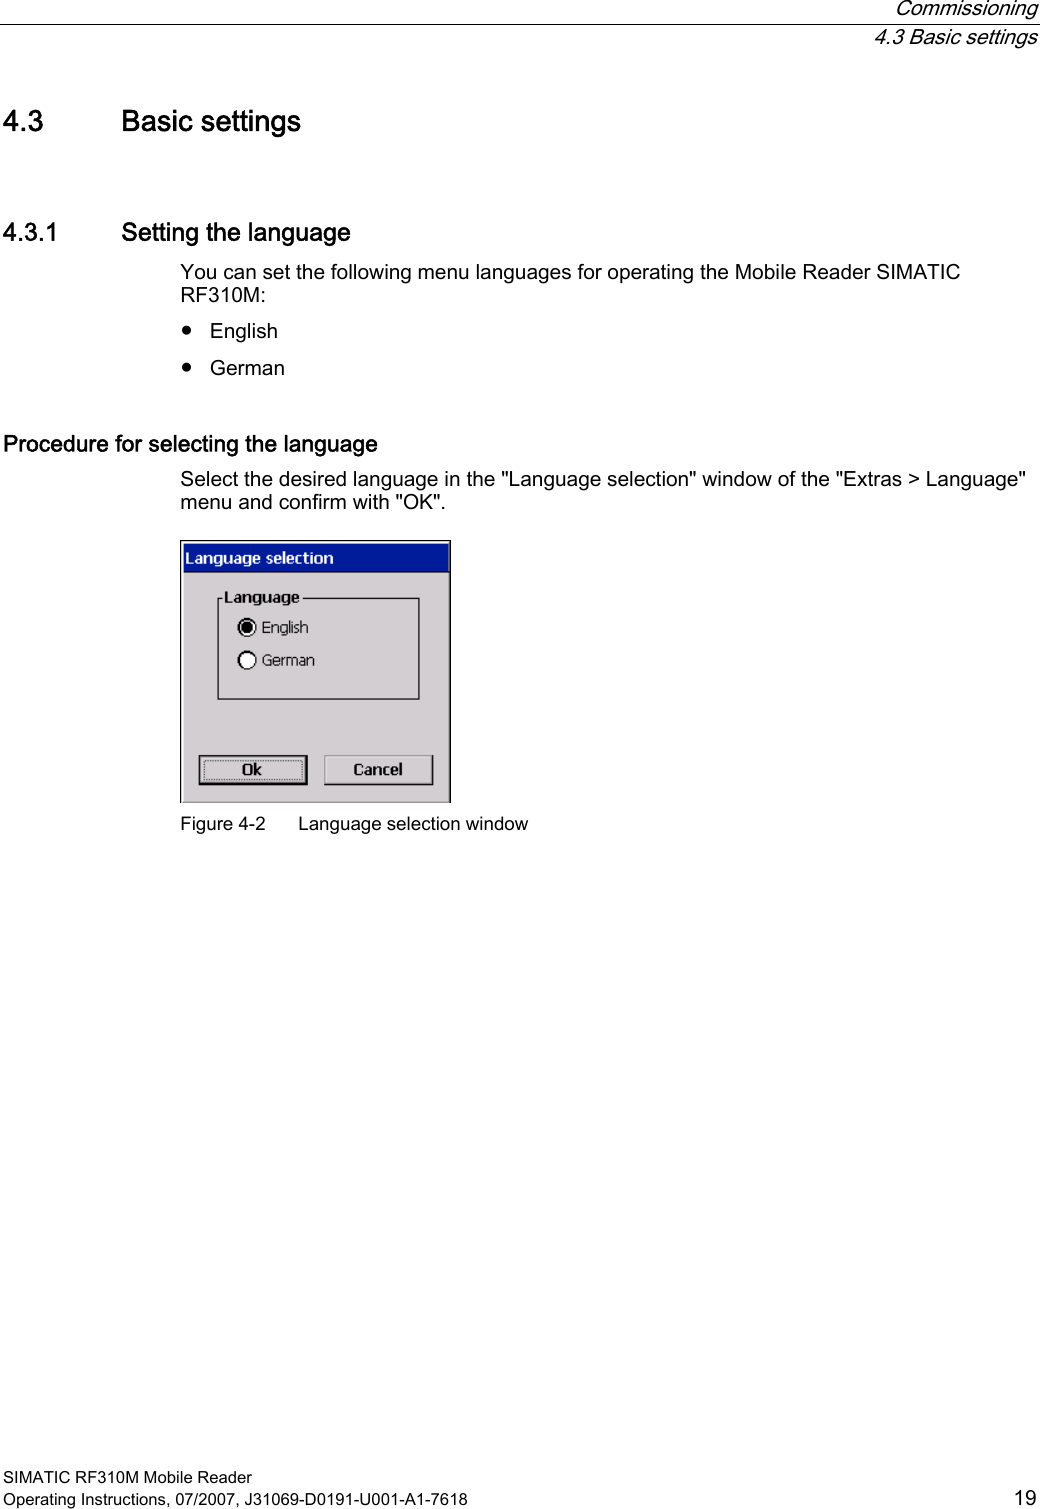  Commissioning  4.3 Basic settings SIMATIC RF310M Mobile Reader Operating Instructions, 07/2007, J31069-D0191-U001-A1-7618  19 4.3 Basic settings 4.3.1 Setting the language You can set the following menu languages for operating the Mobile Reader SIMATIC RF310M: ●  English ●  German Procedure for selecting the language Select the desired language in the &quot;Language selection&quot; window of the &quot;Extras &gt; Language&quot; menu and confirm with &quot;OK&quot;.  Figure 4-2  Language selection window 